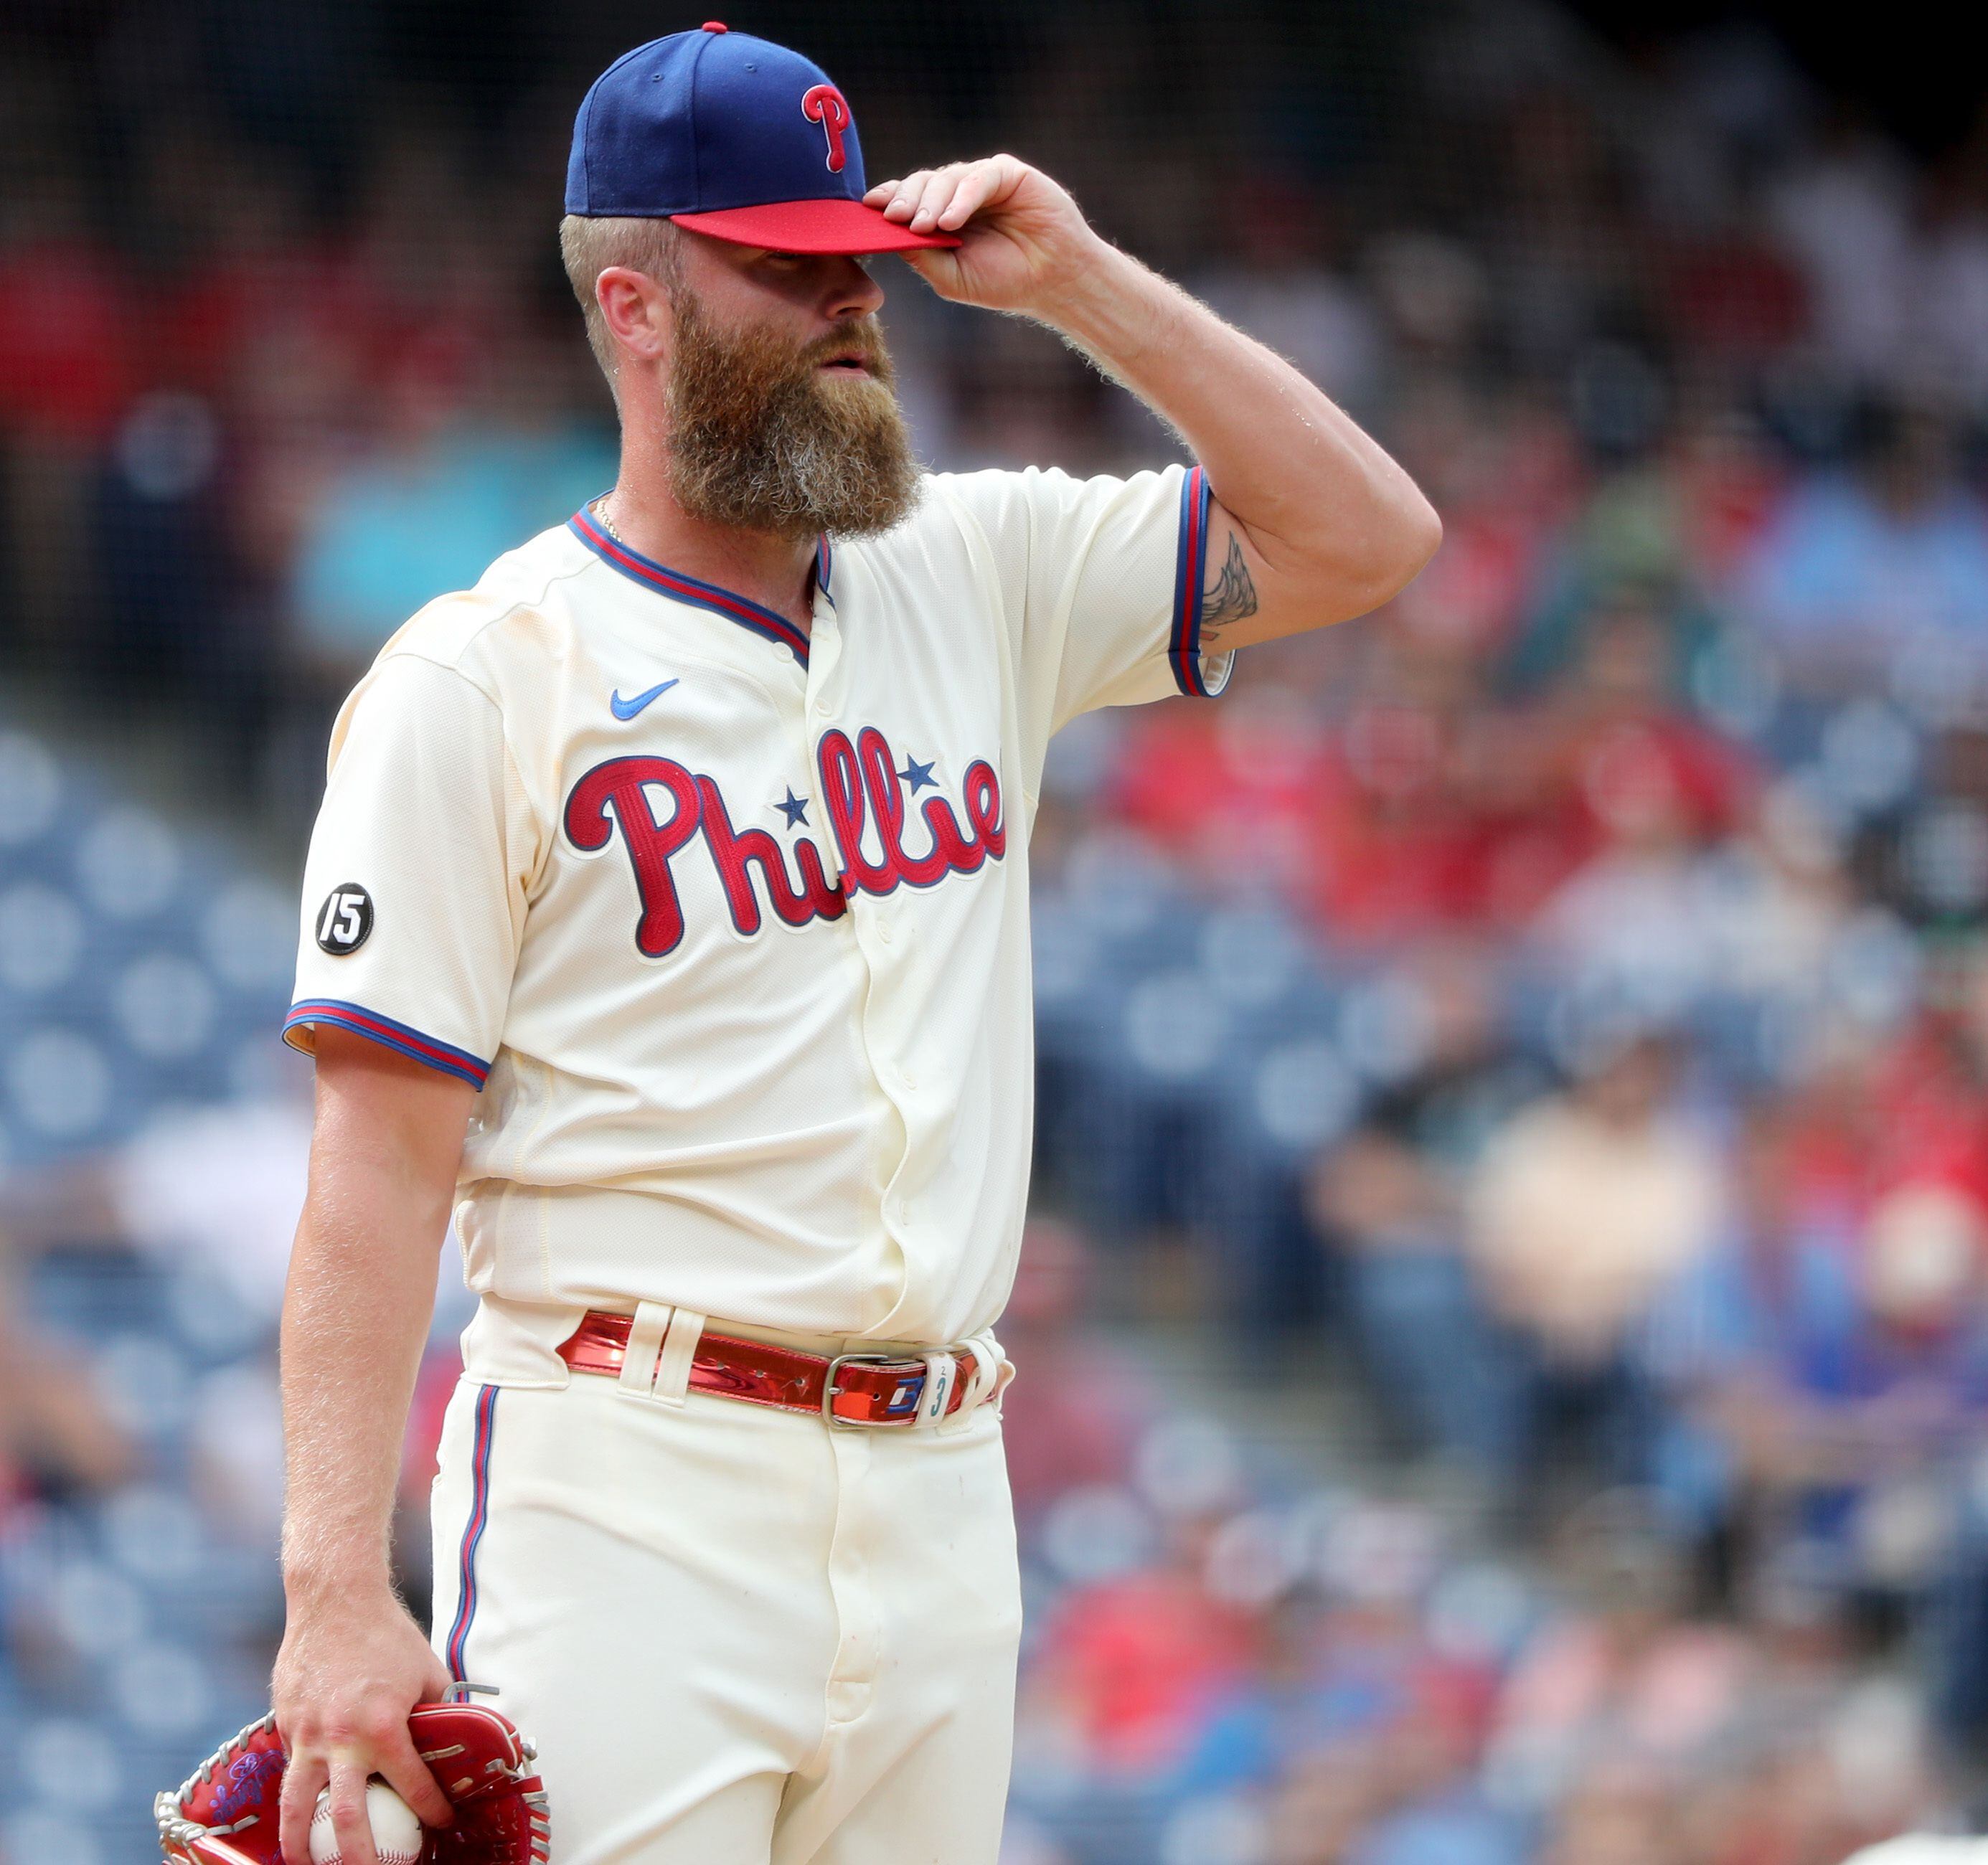 Phillies reliever Archie Bradley to throw bullpen sessions